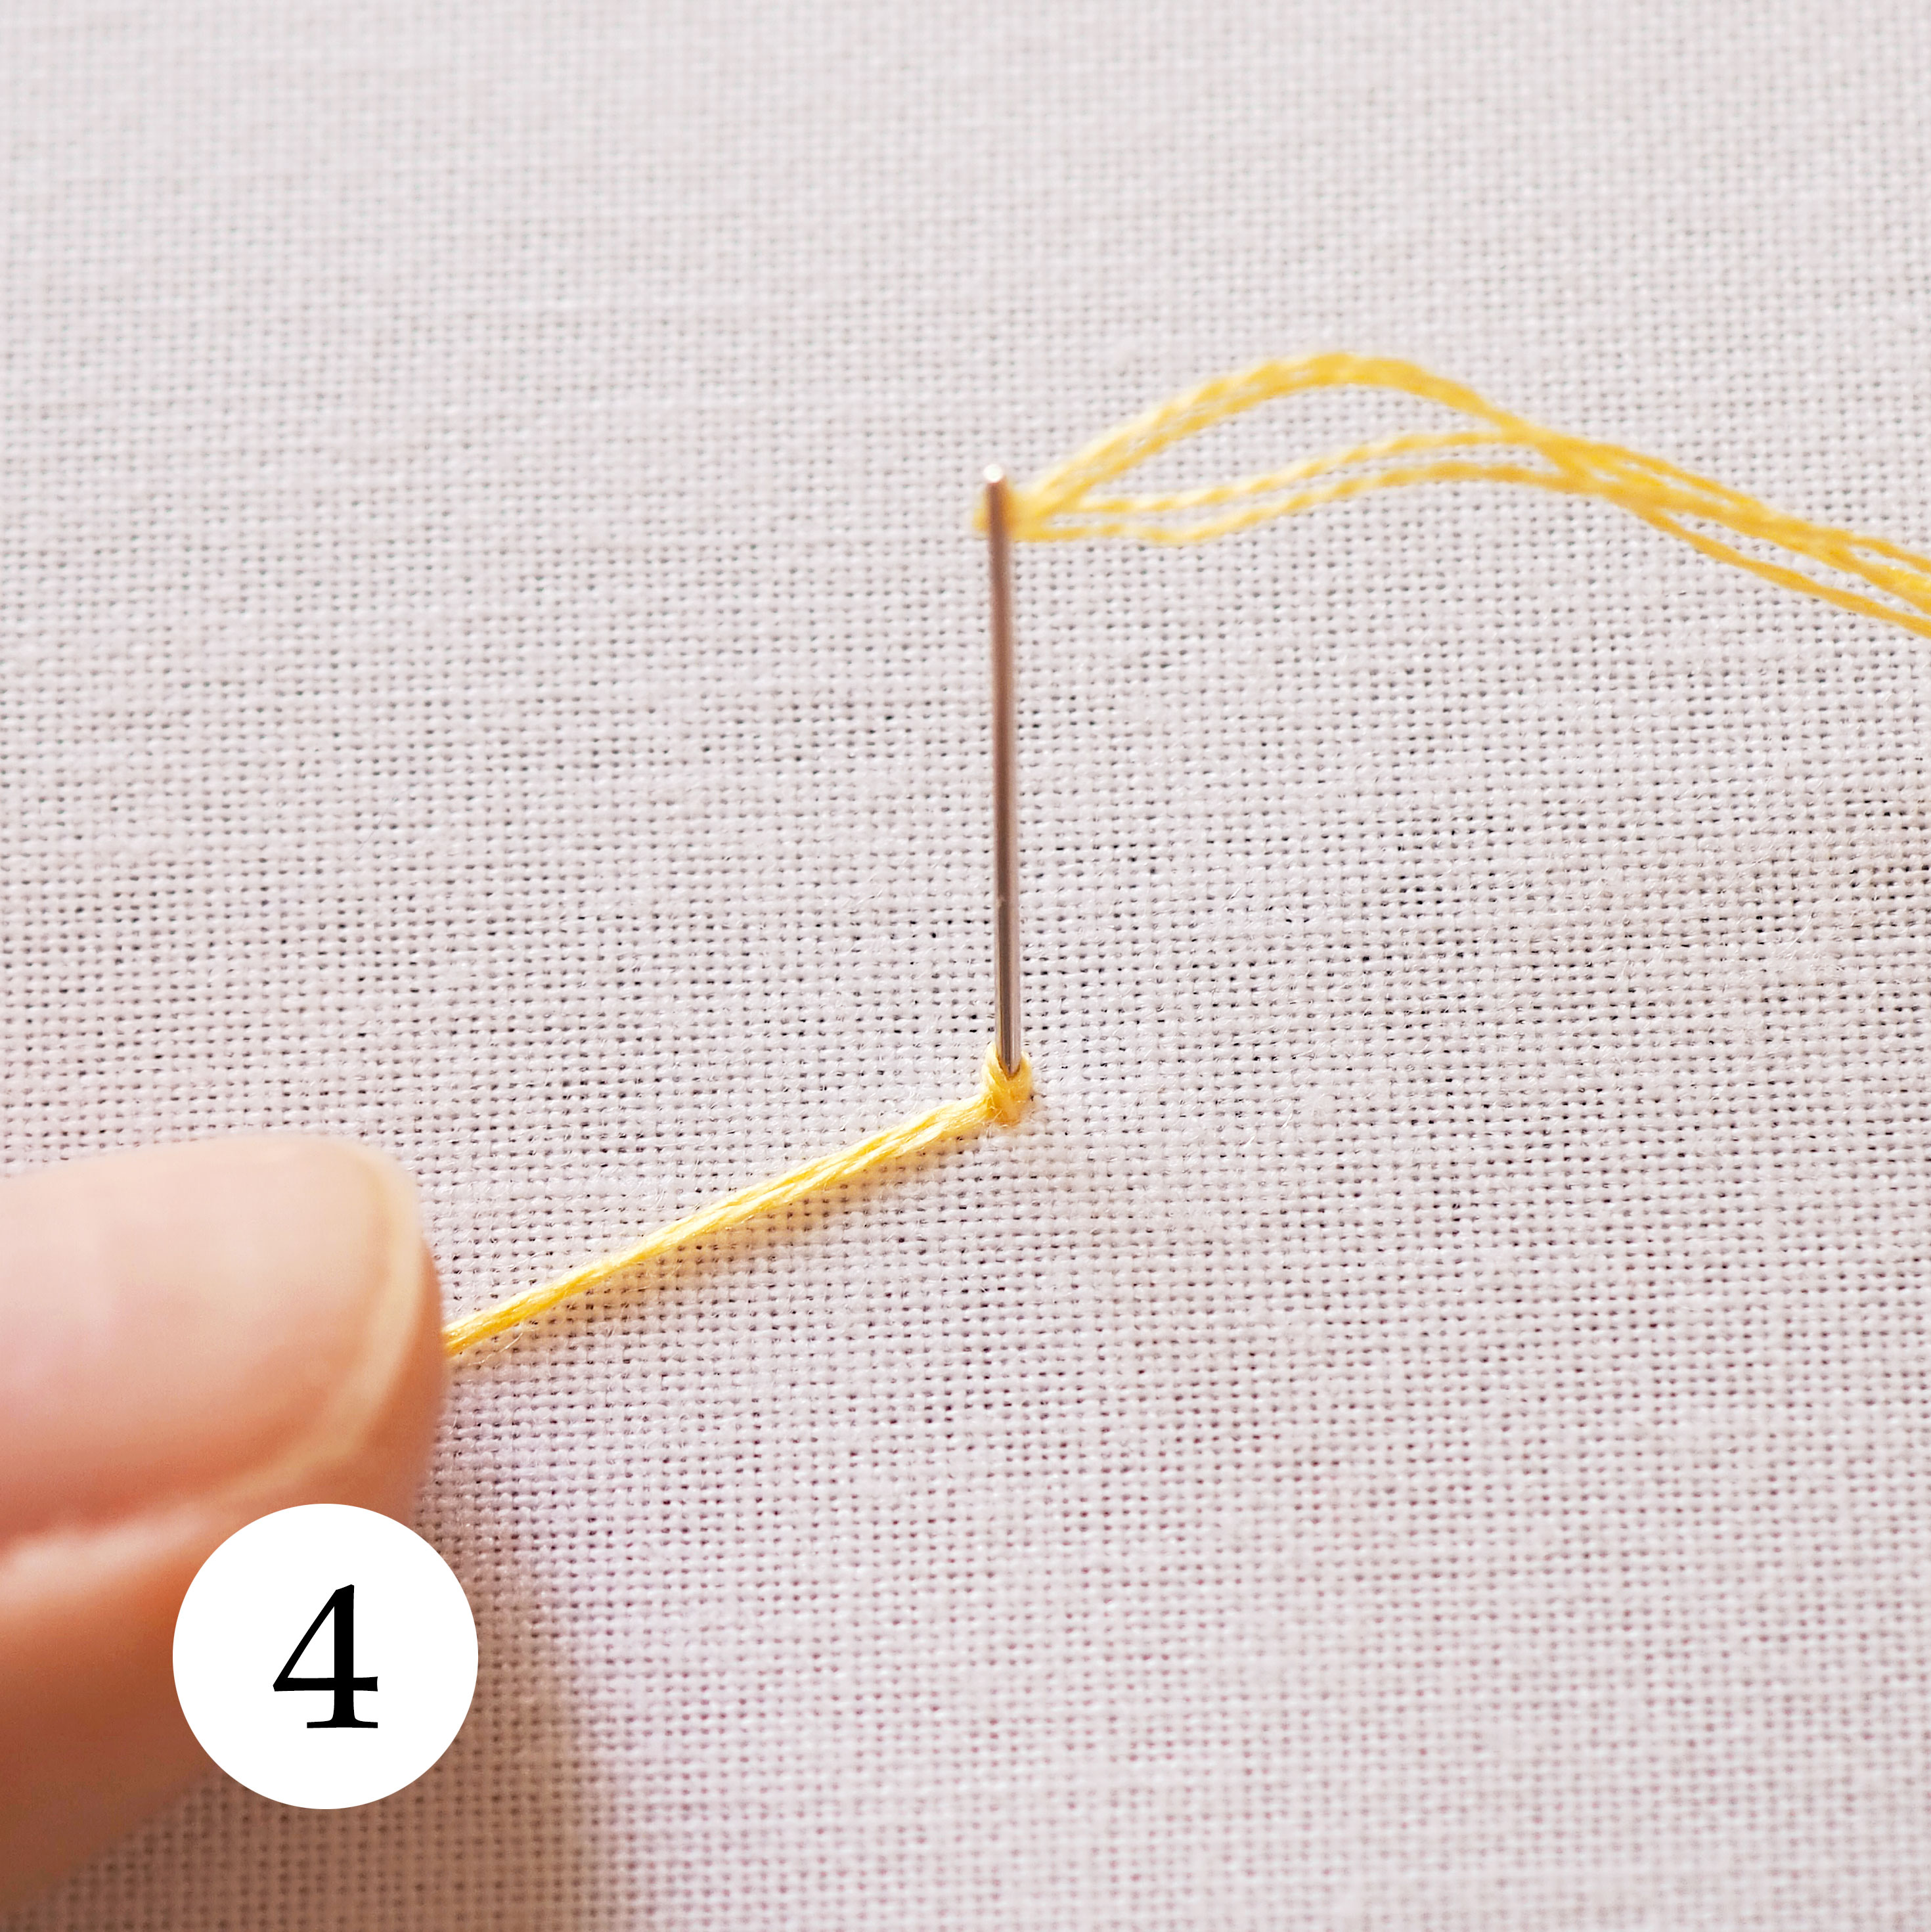 French Knot Embroidery Tutorial | LoveCrafts